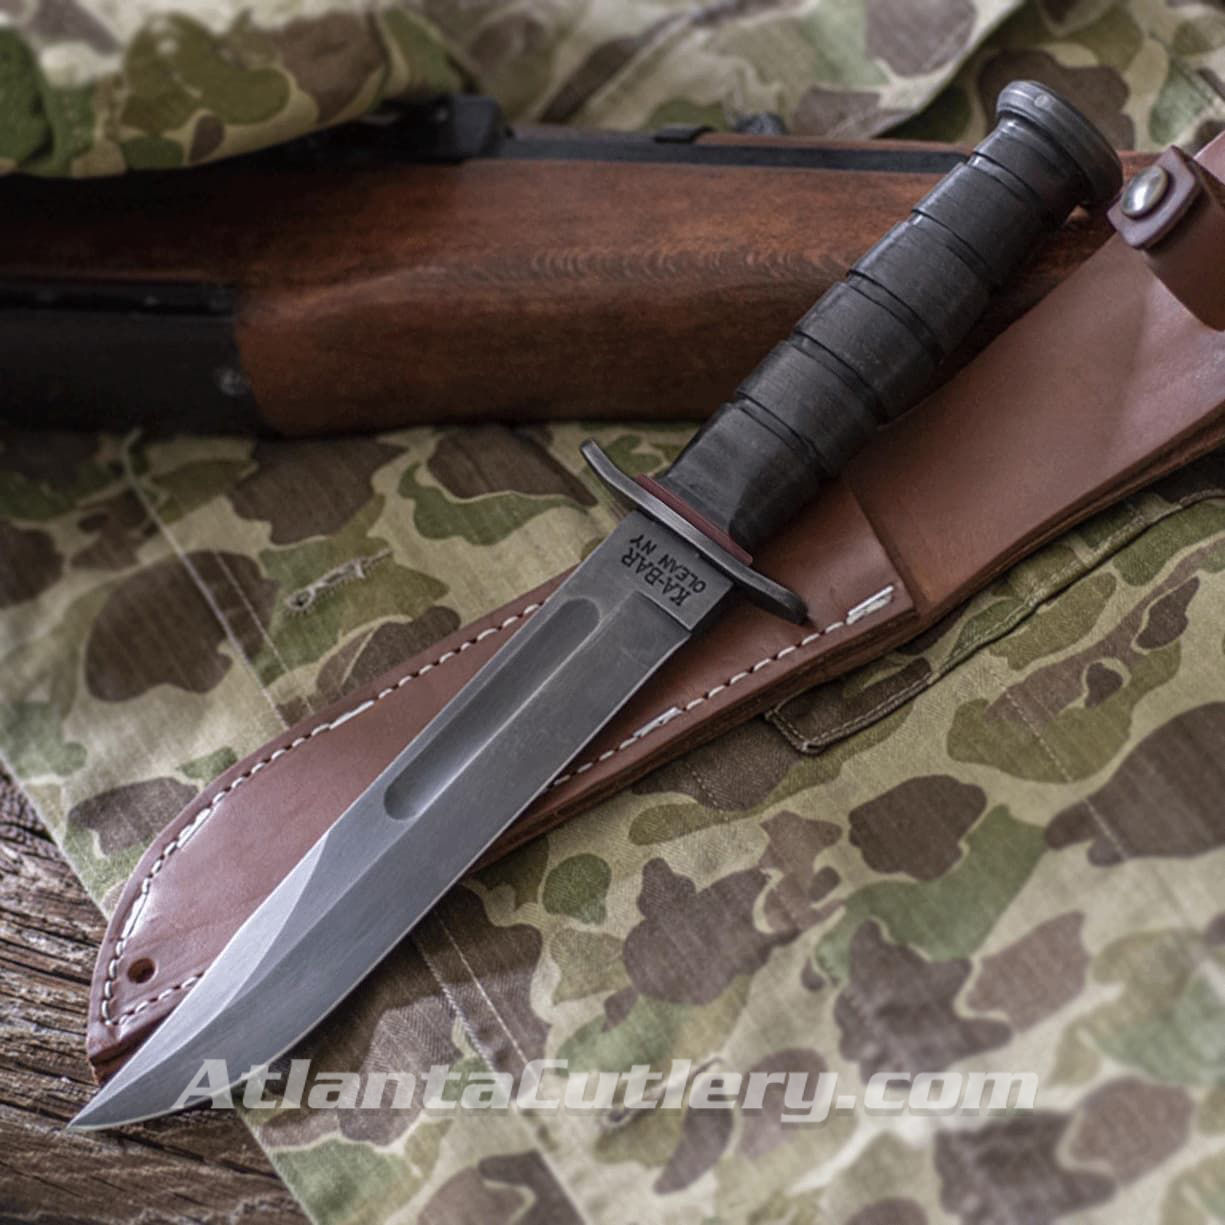 replica WWII KA-BAR Red Spacer Fighting Knife with 1095 cro-van steel blade, hand-shaped and dyed leather spacers, aged sheath